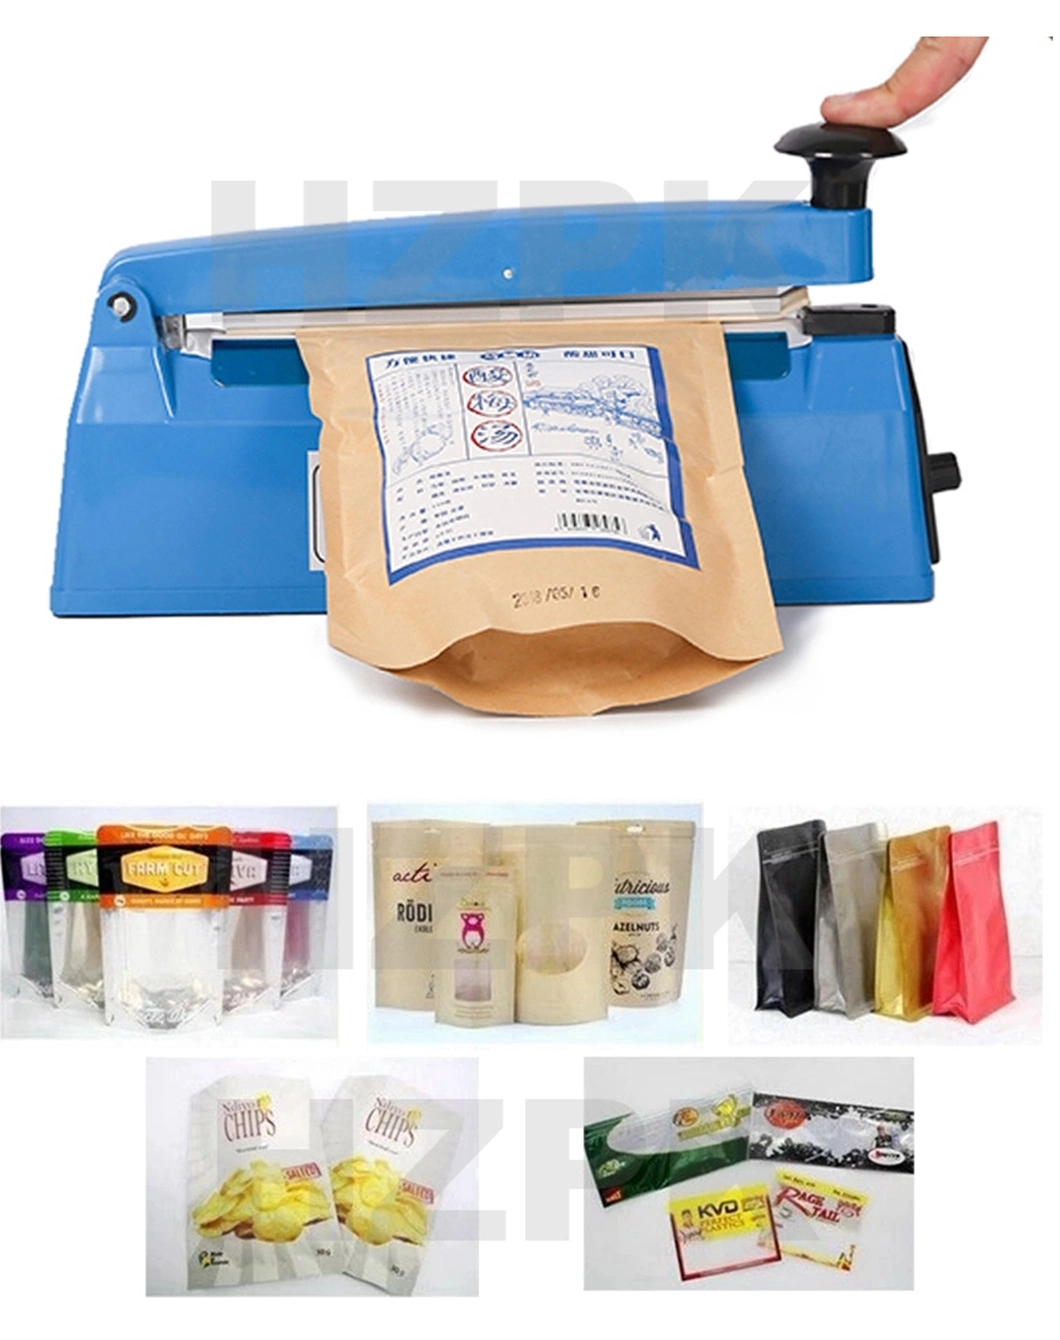 Pfs-100 Small Hand Food Plastic Bags Heat Sealer with Iron Body